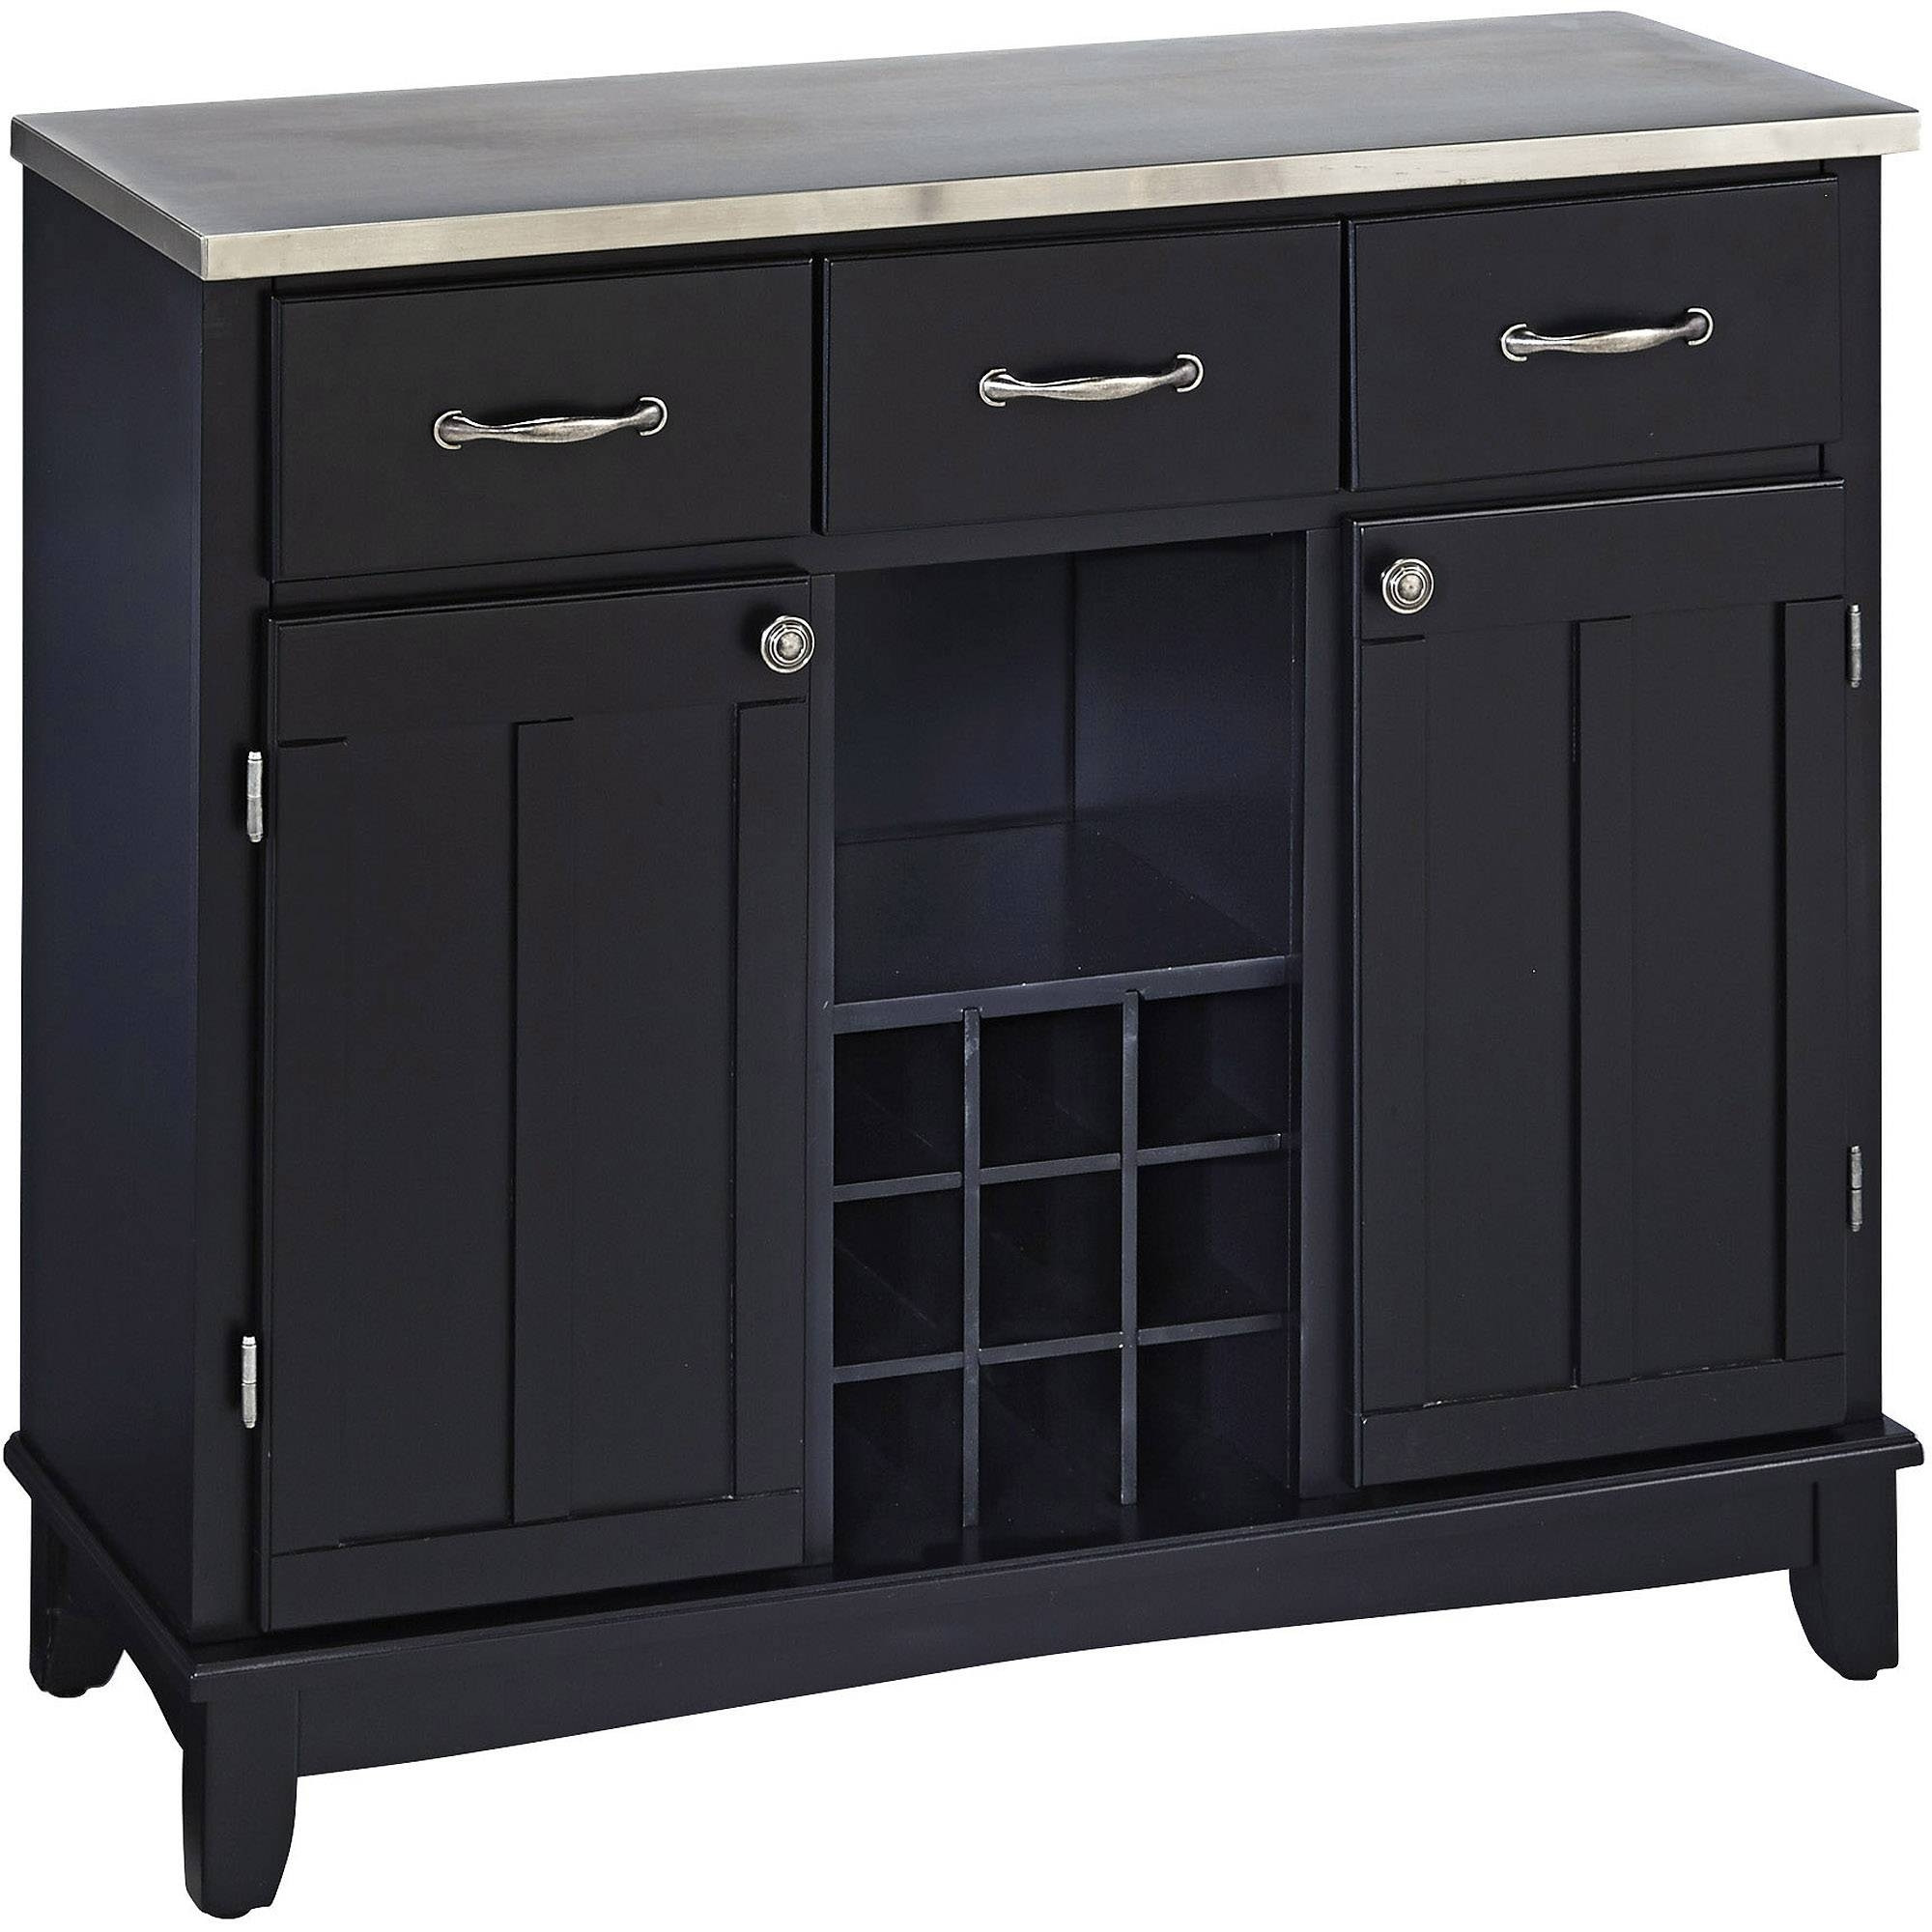 Small Kitchen Buffet Cabinet
 20 Inspirations of Small Black Sideboard